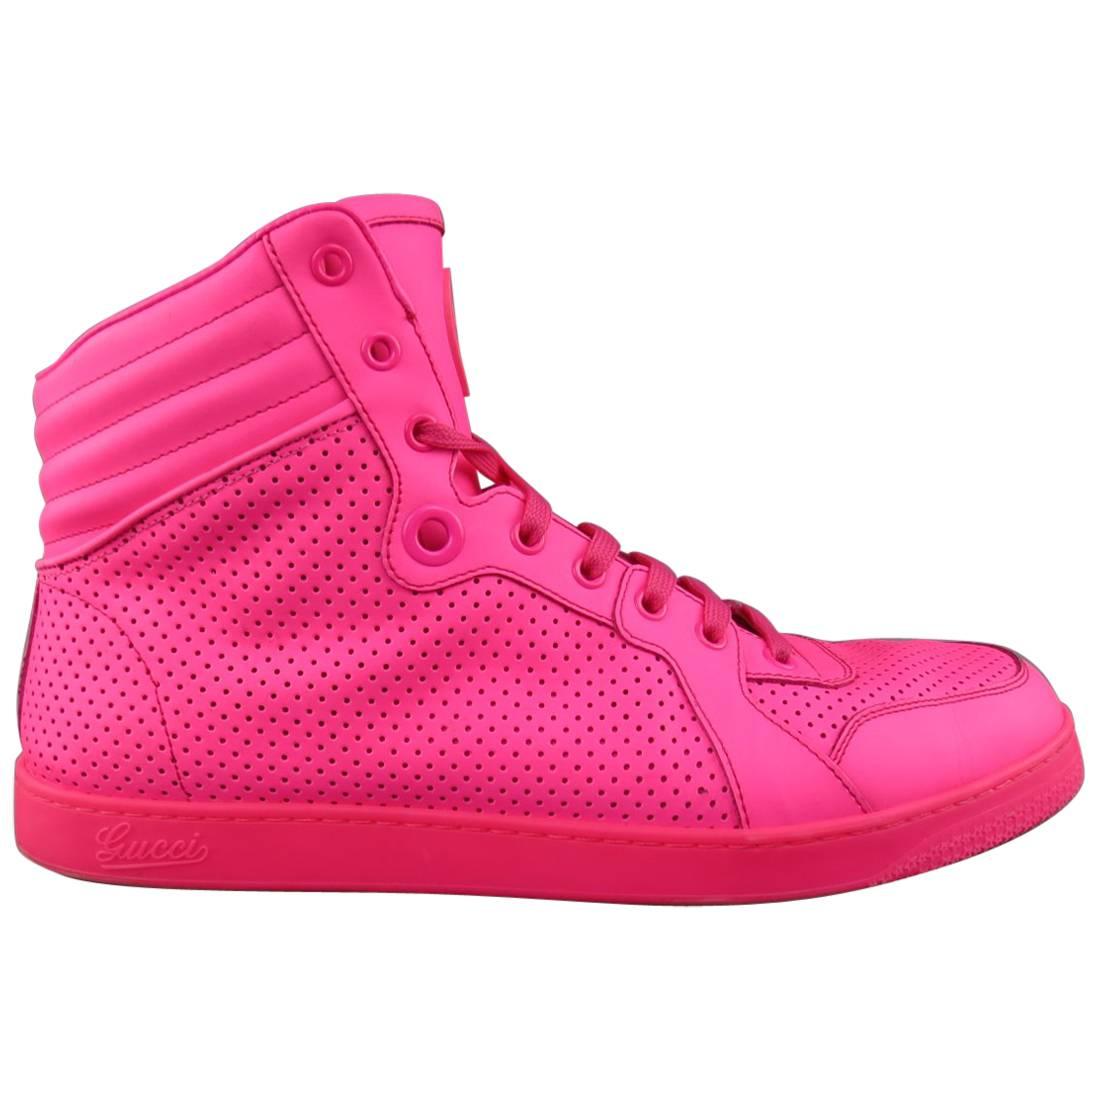 Men's GUCCI Size 11 Neon Pink Perforated Leather High Top CODA Sneakers